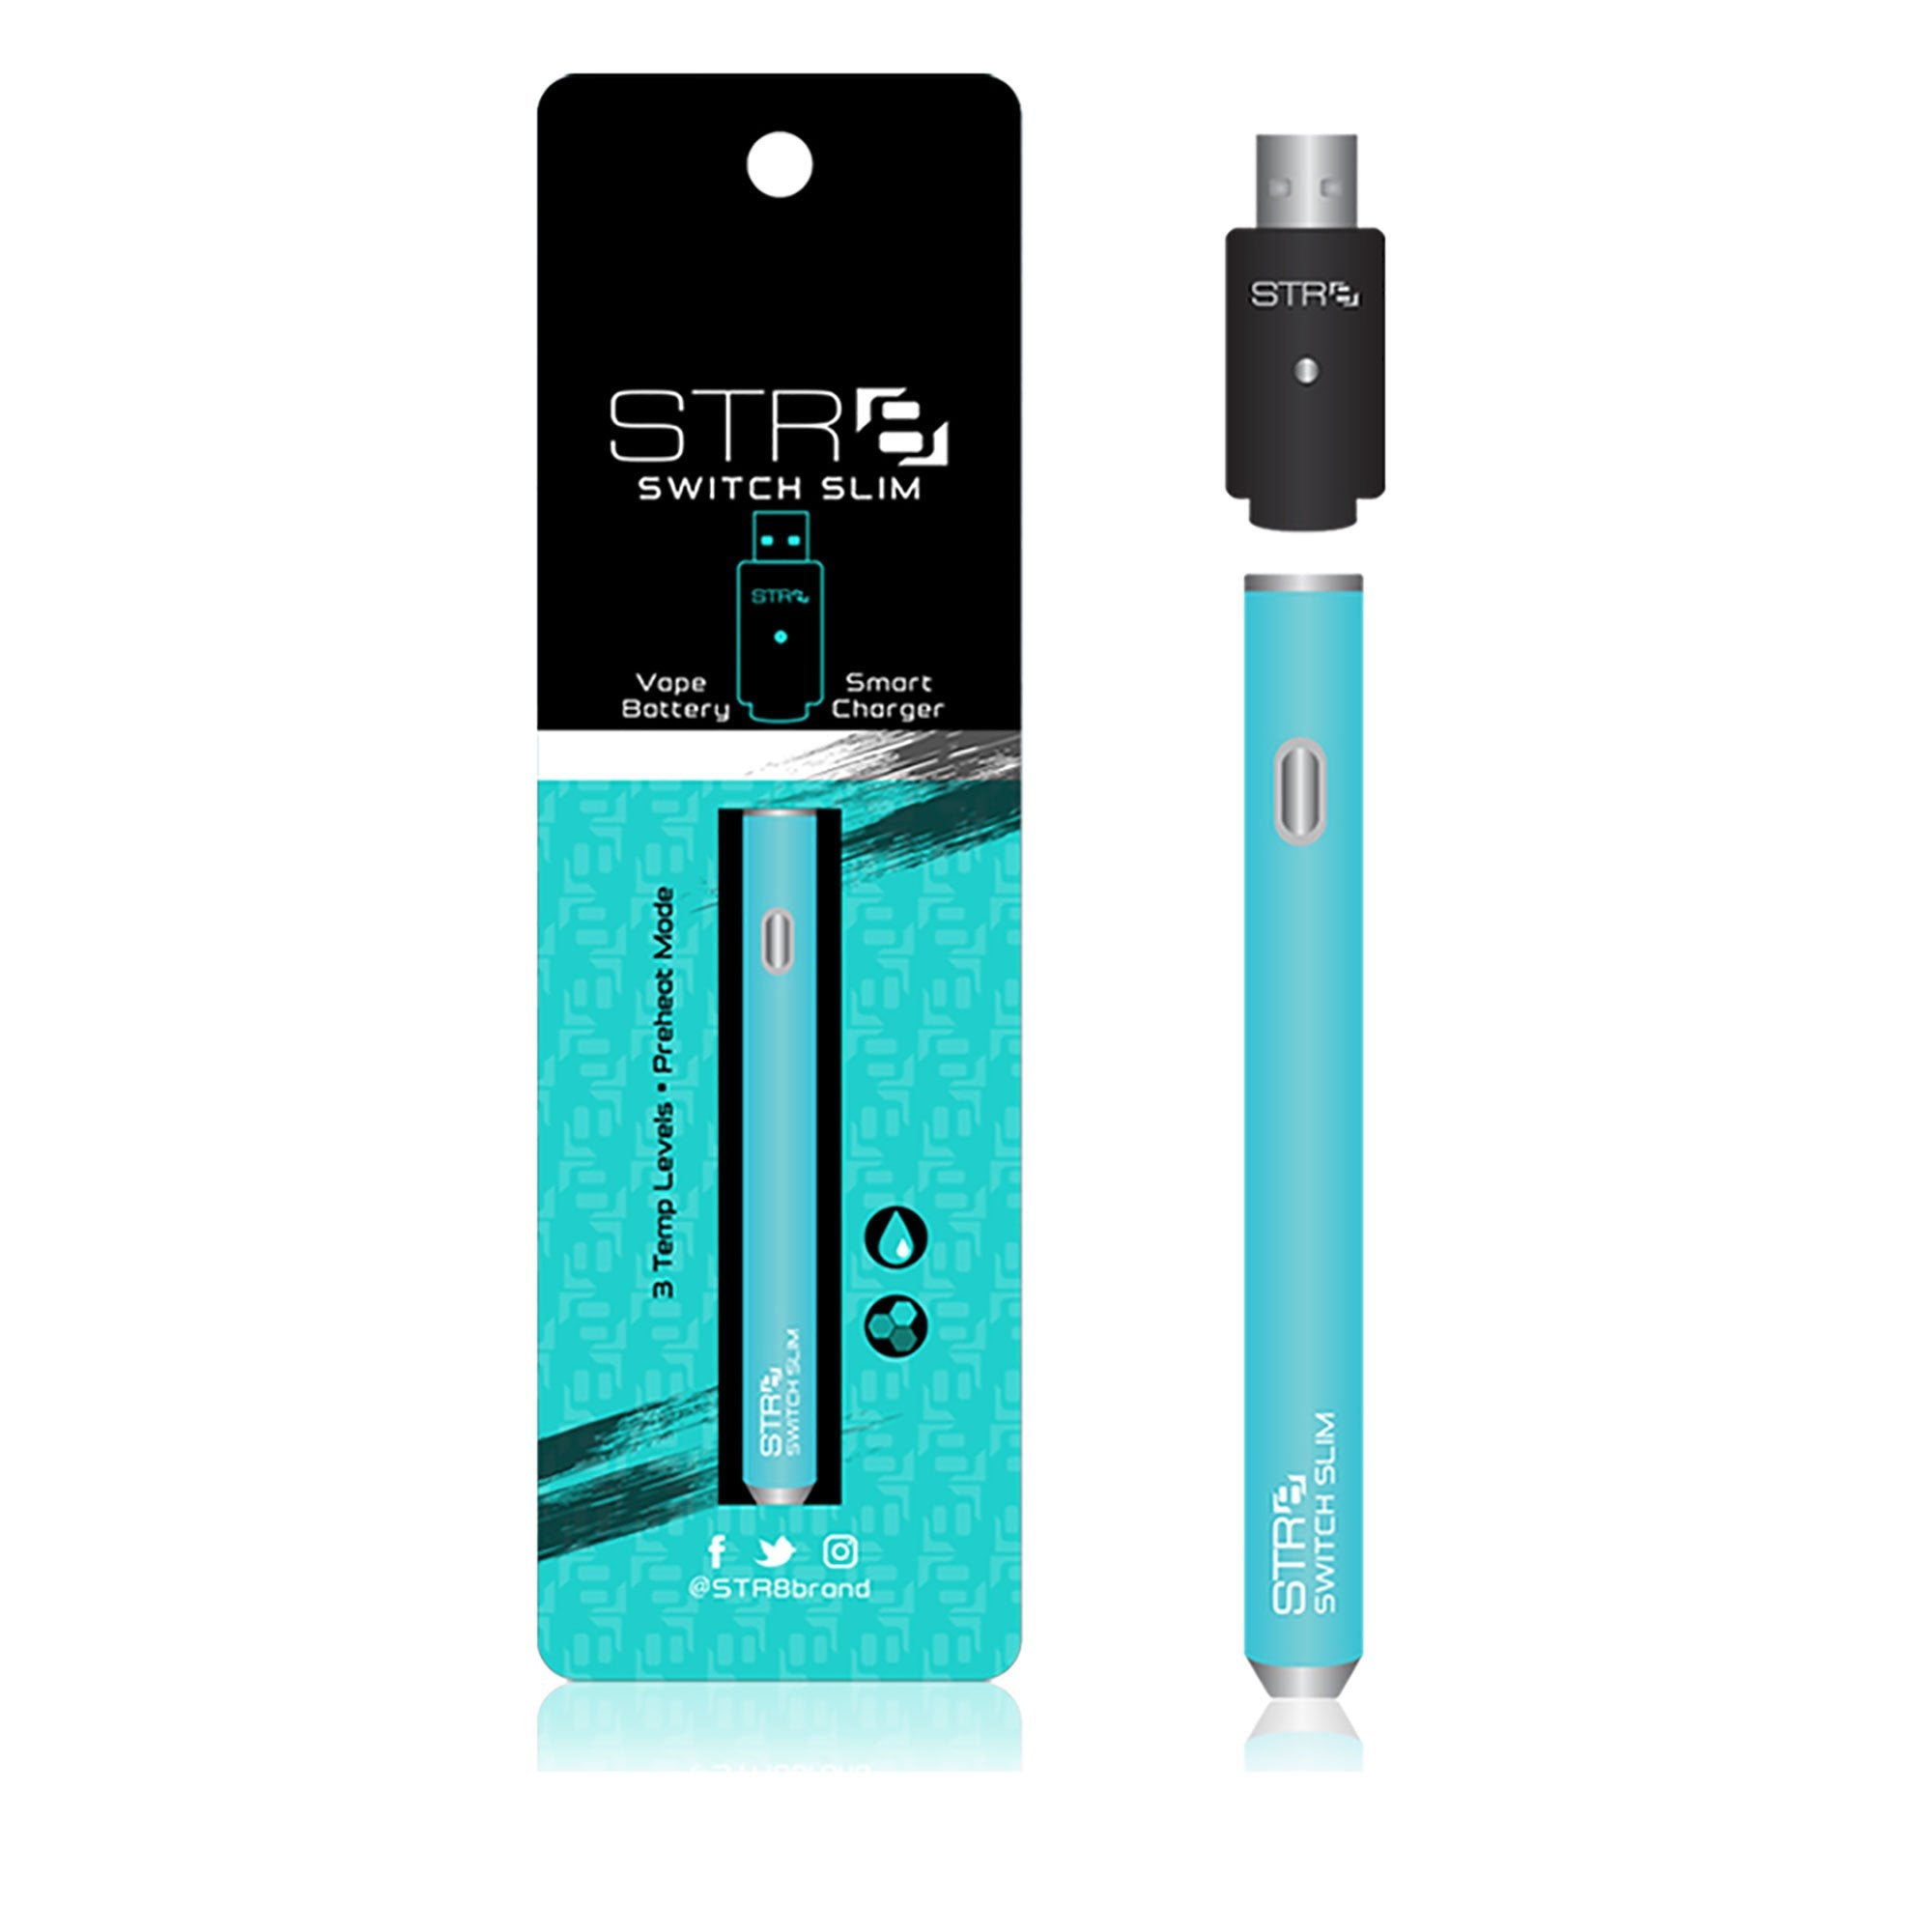 STR8 | Teal Slim Switch Battery w/ Charger 280MAH - 5 Count - 1